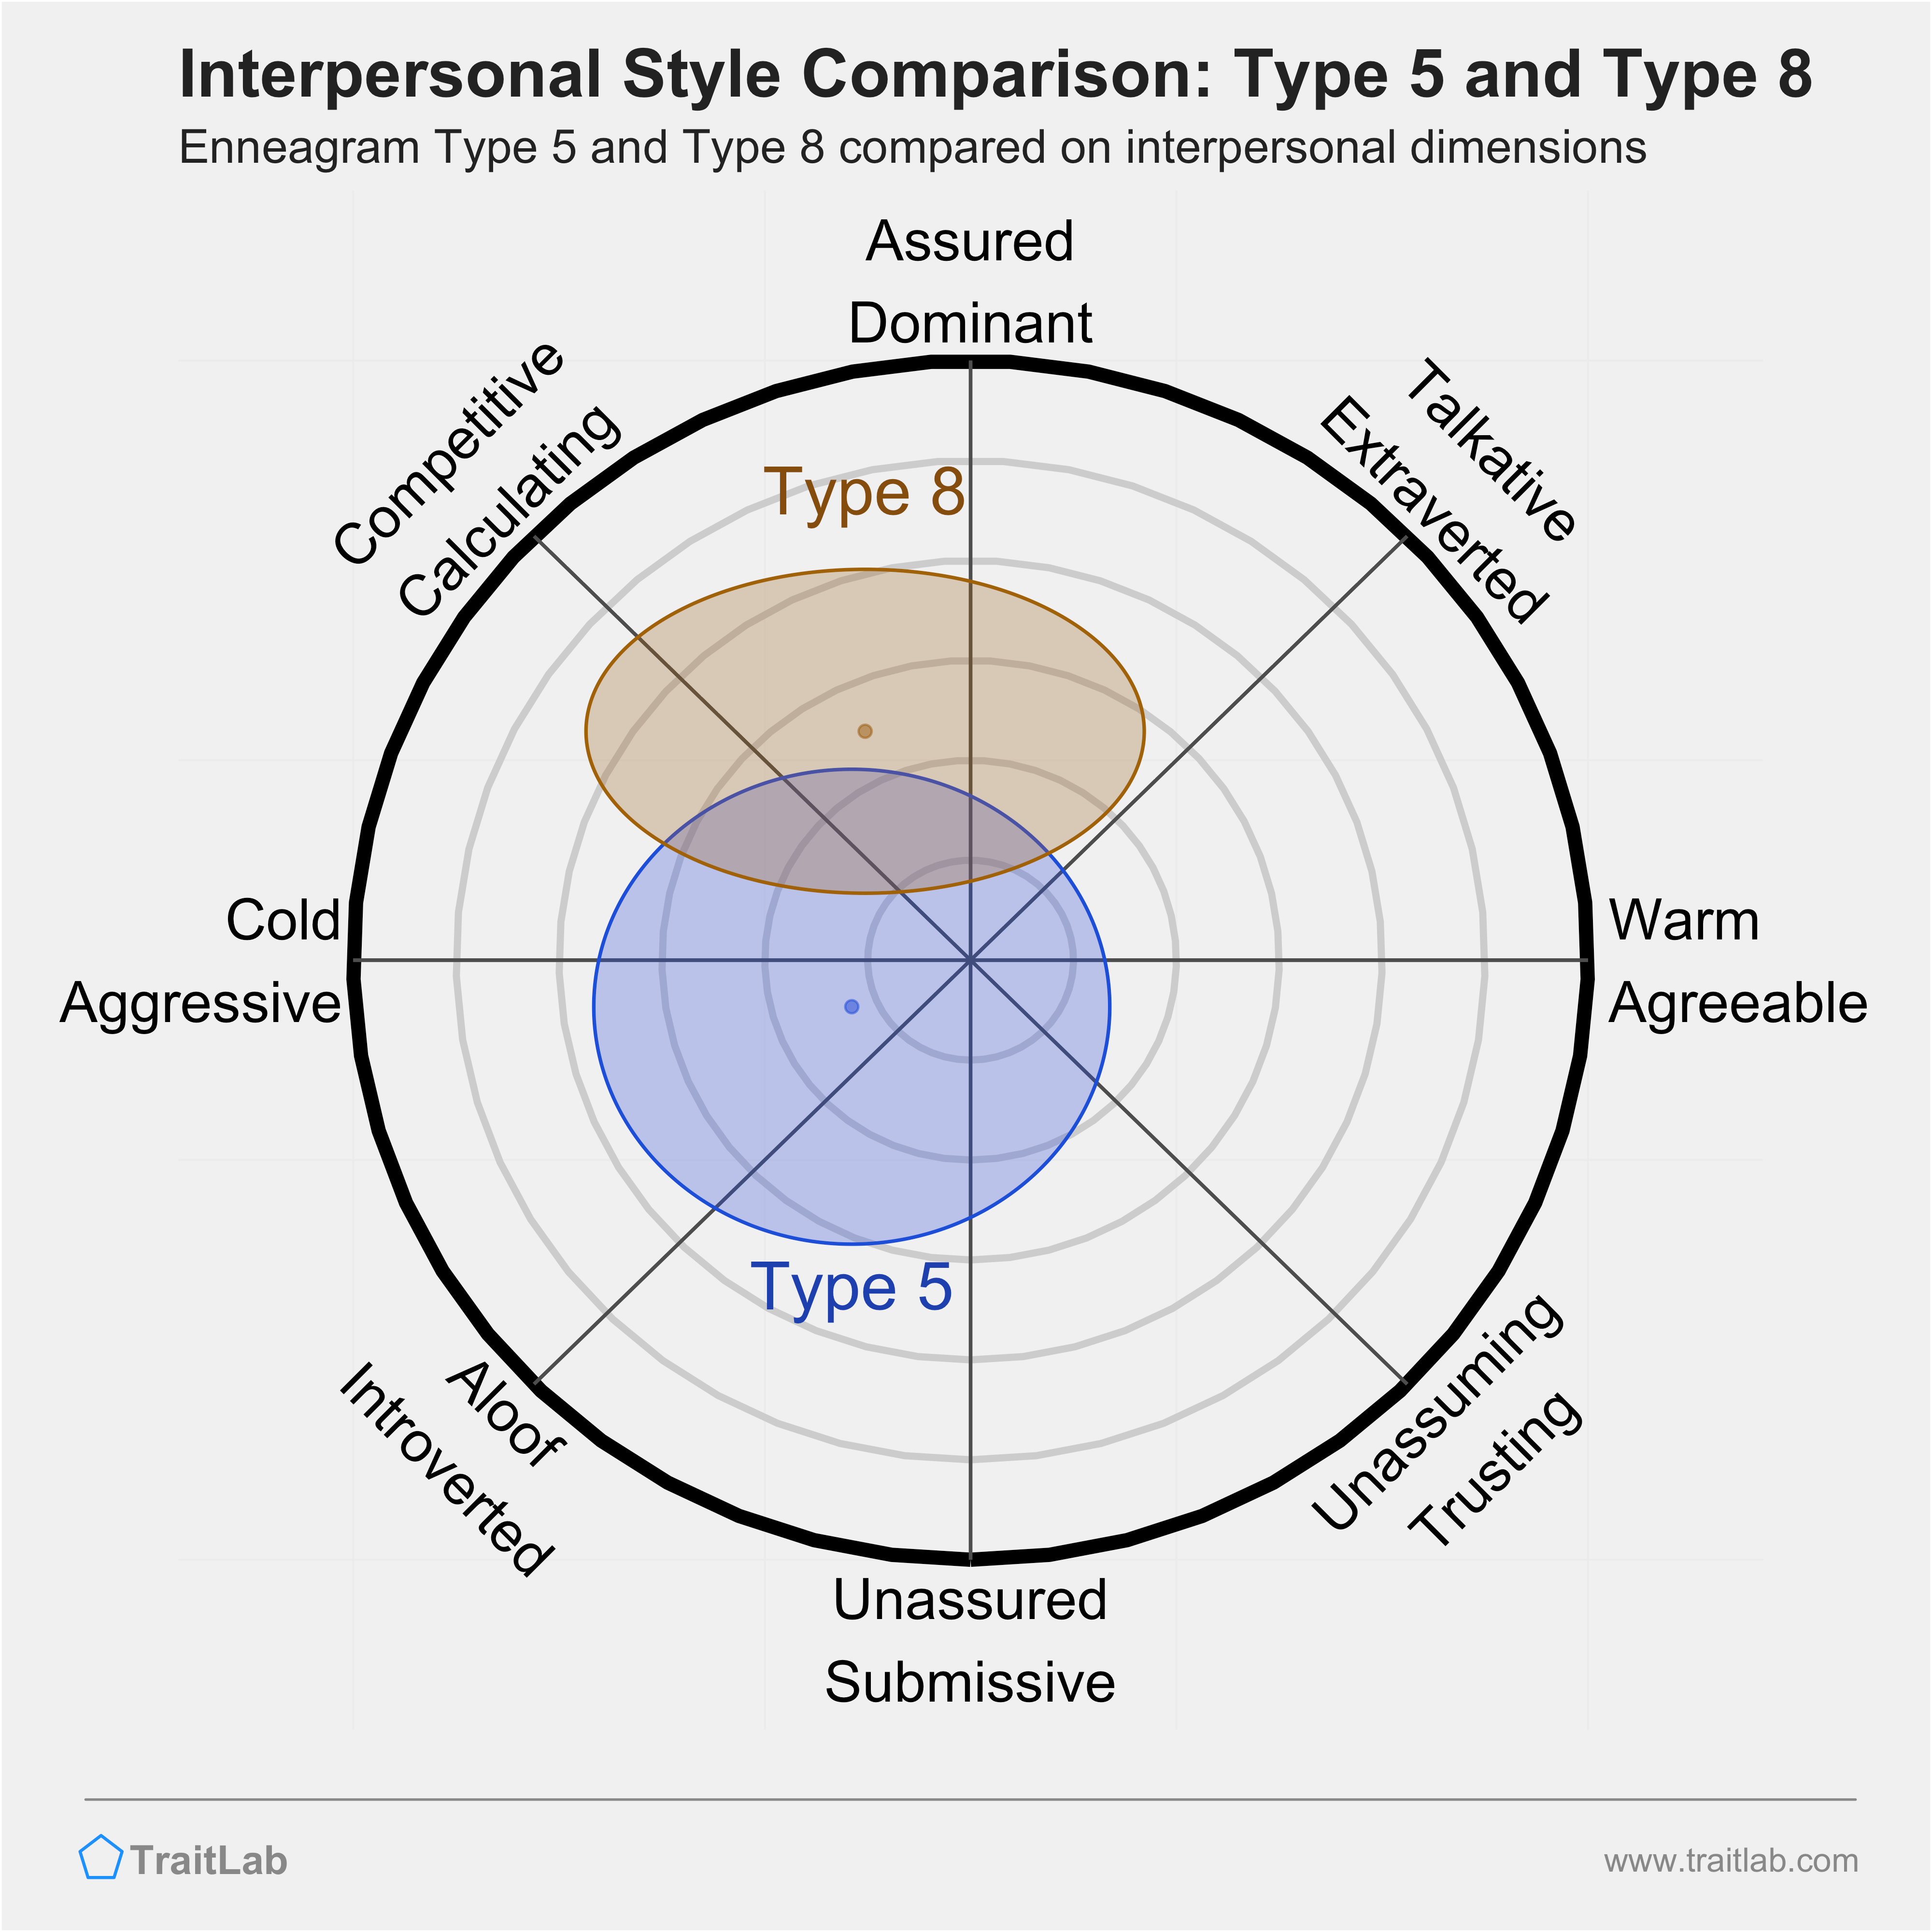 Enneagram Type 5 and Type 8 comparison across interpersonal dimensions